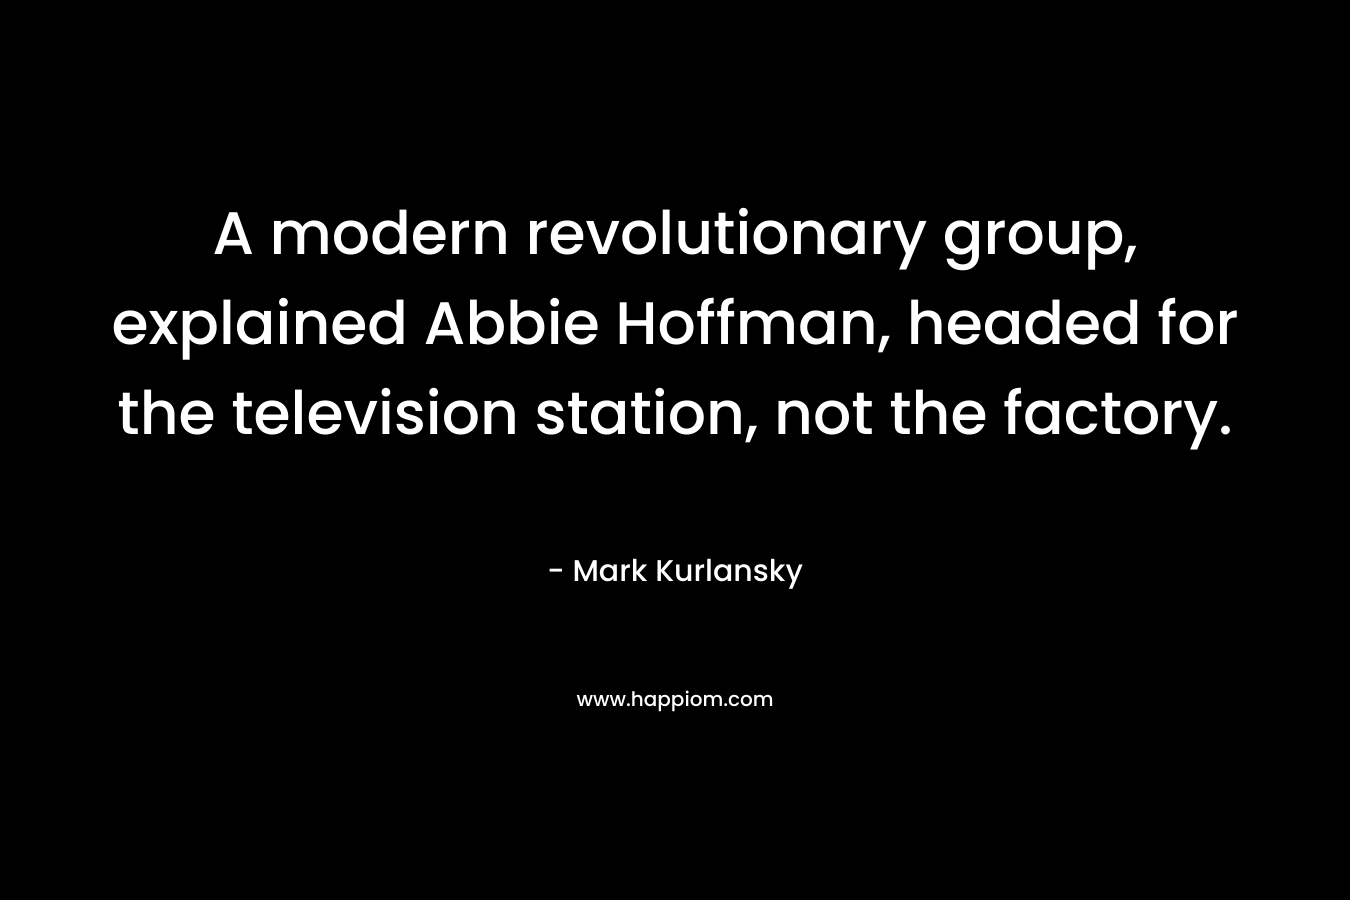 A modern revolutionary group, explained Abbie Hoffman, headed for the television station, not the factory. – Mark Kurlansky